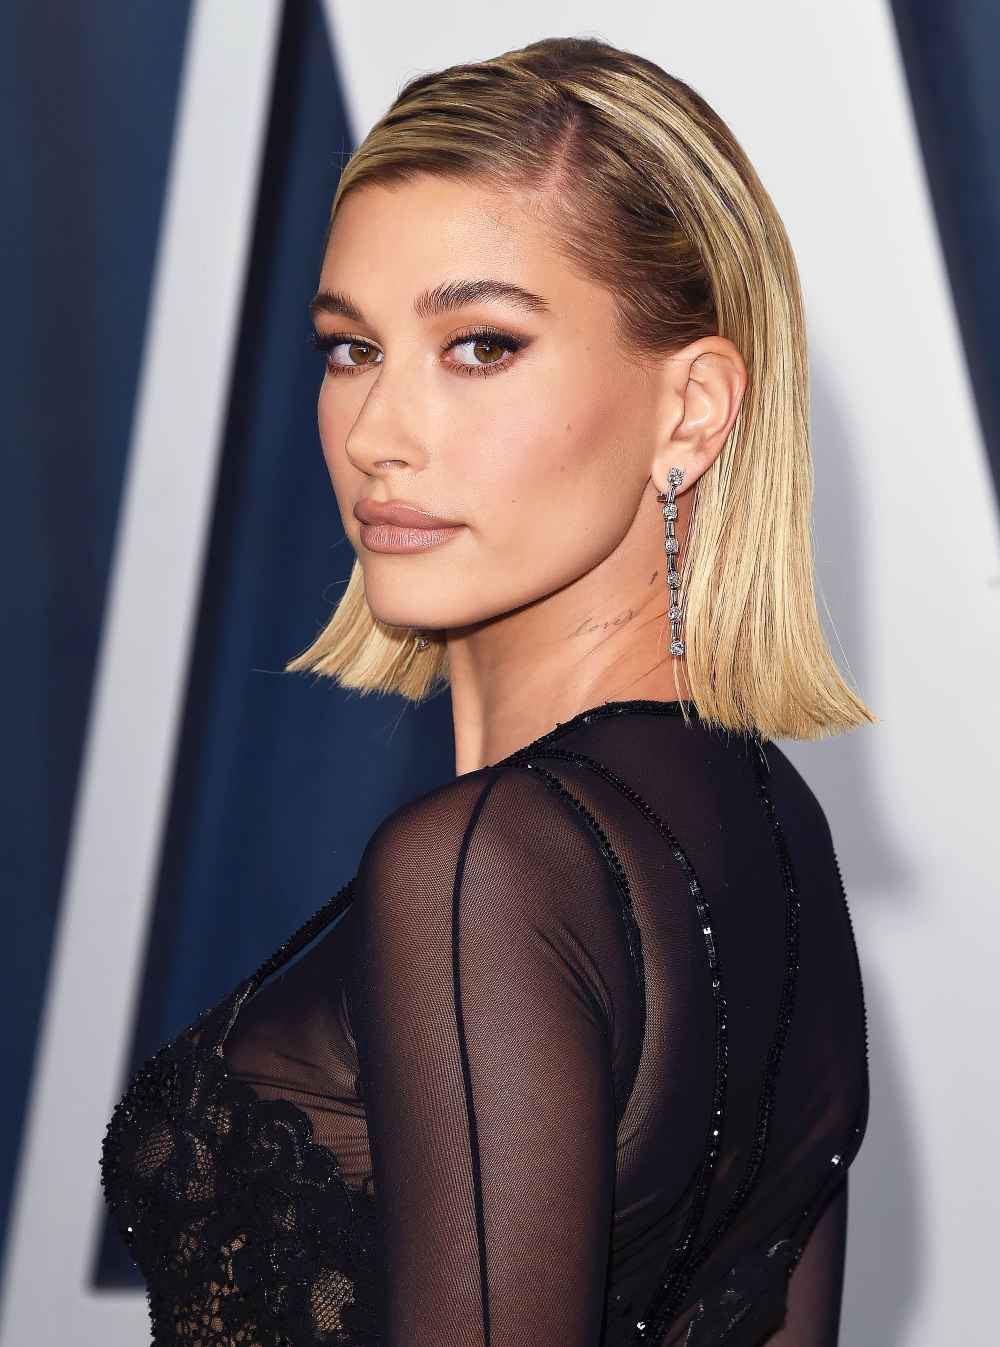 Hailey Baldwin Shuts Down Plastic Surgery Rumors: ‘I’ve Never Touched My Face’